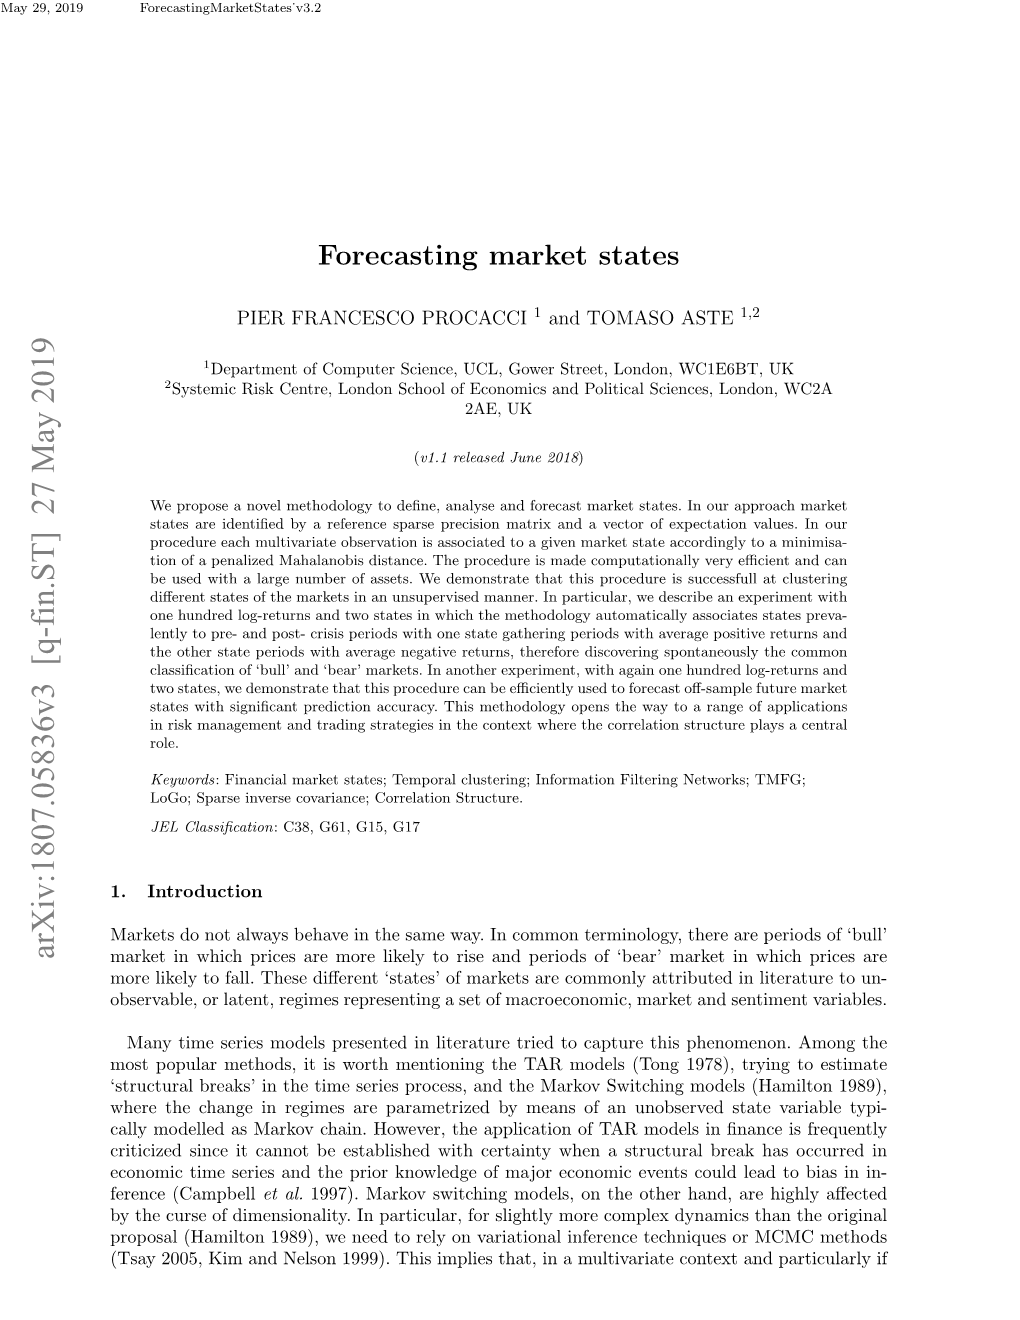 Arxiv:1807.05836V3 [Q-Fin.ST] 27 May 2019 Market in Which Prices Are More Likely to Rise and Periods of ‘Bear’ Market in Which Prices Are More Likely to Fall